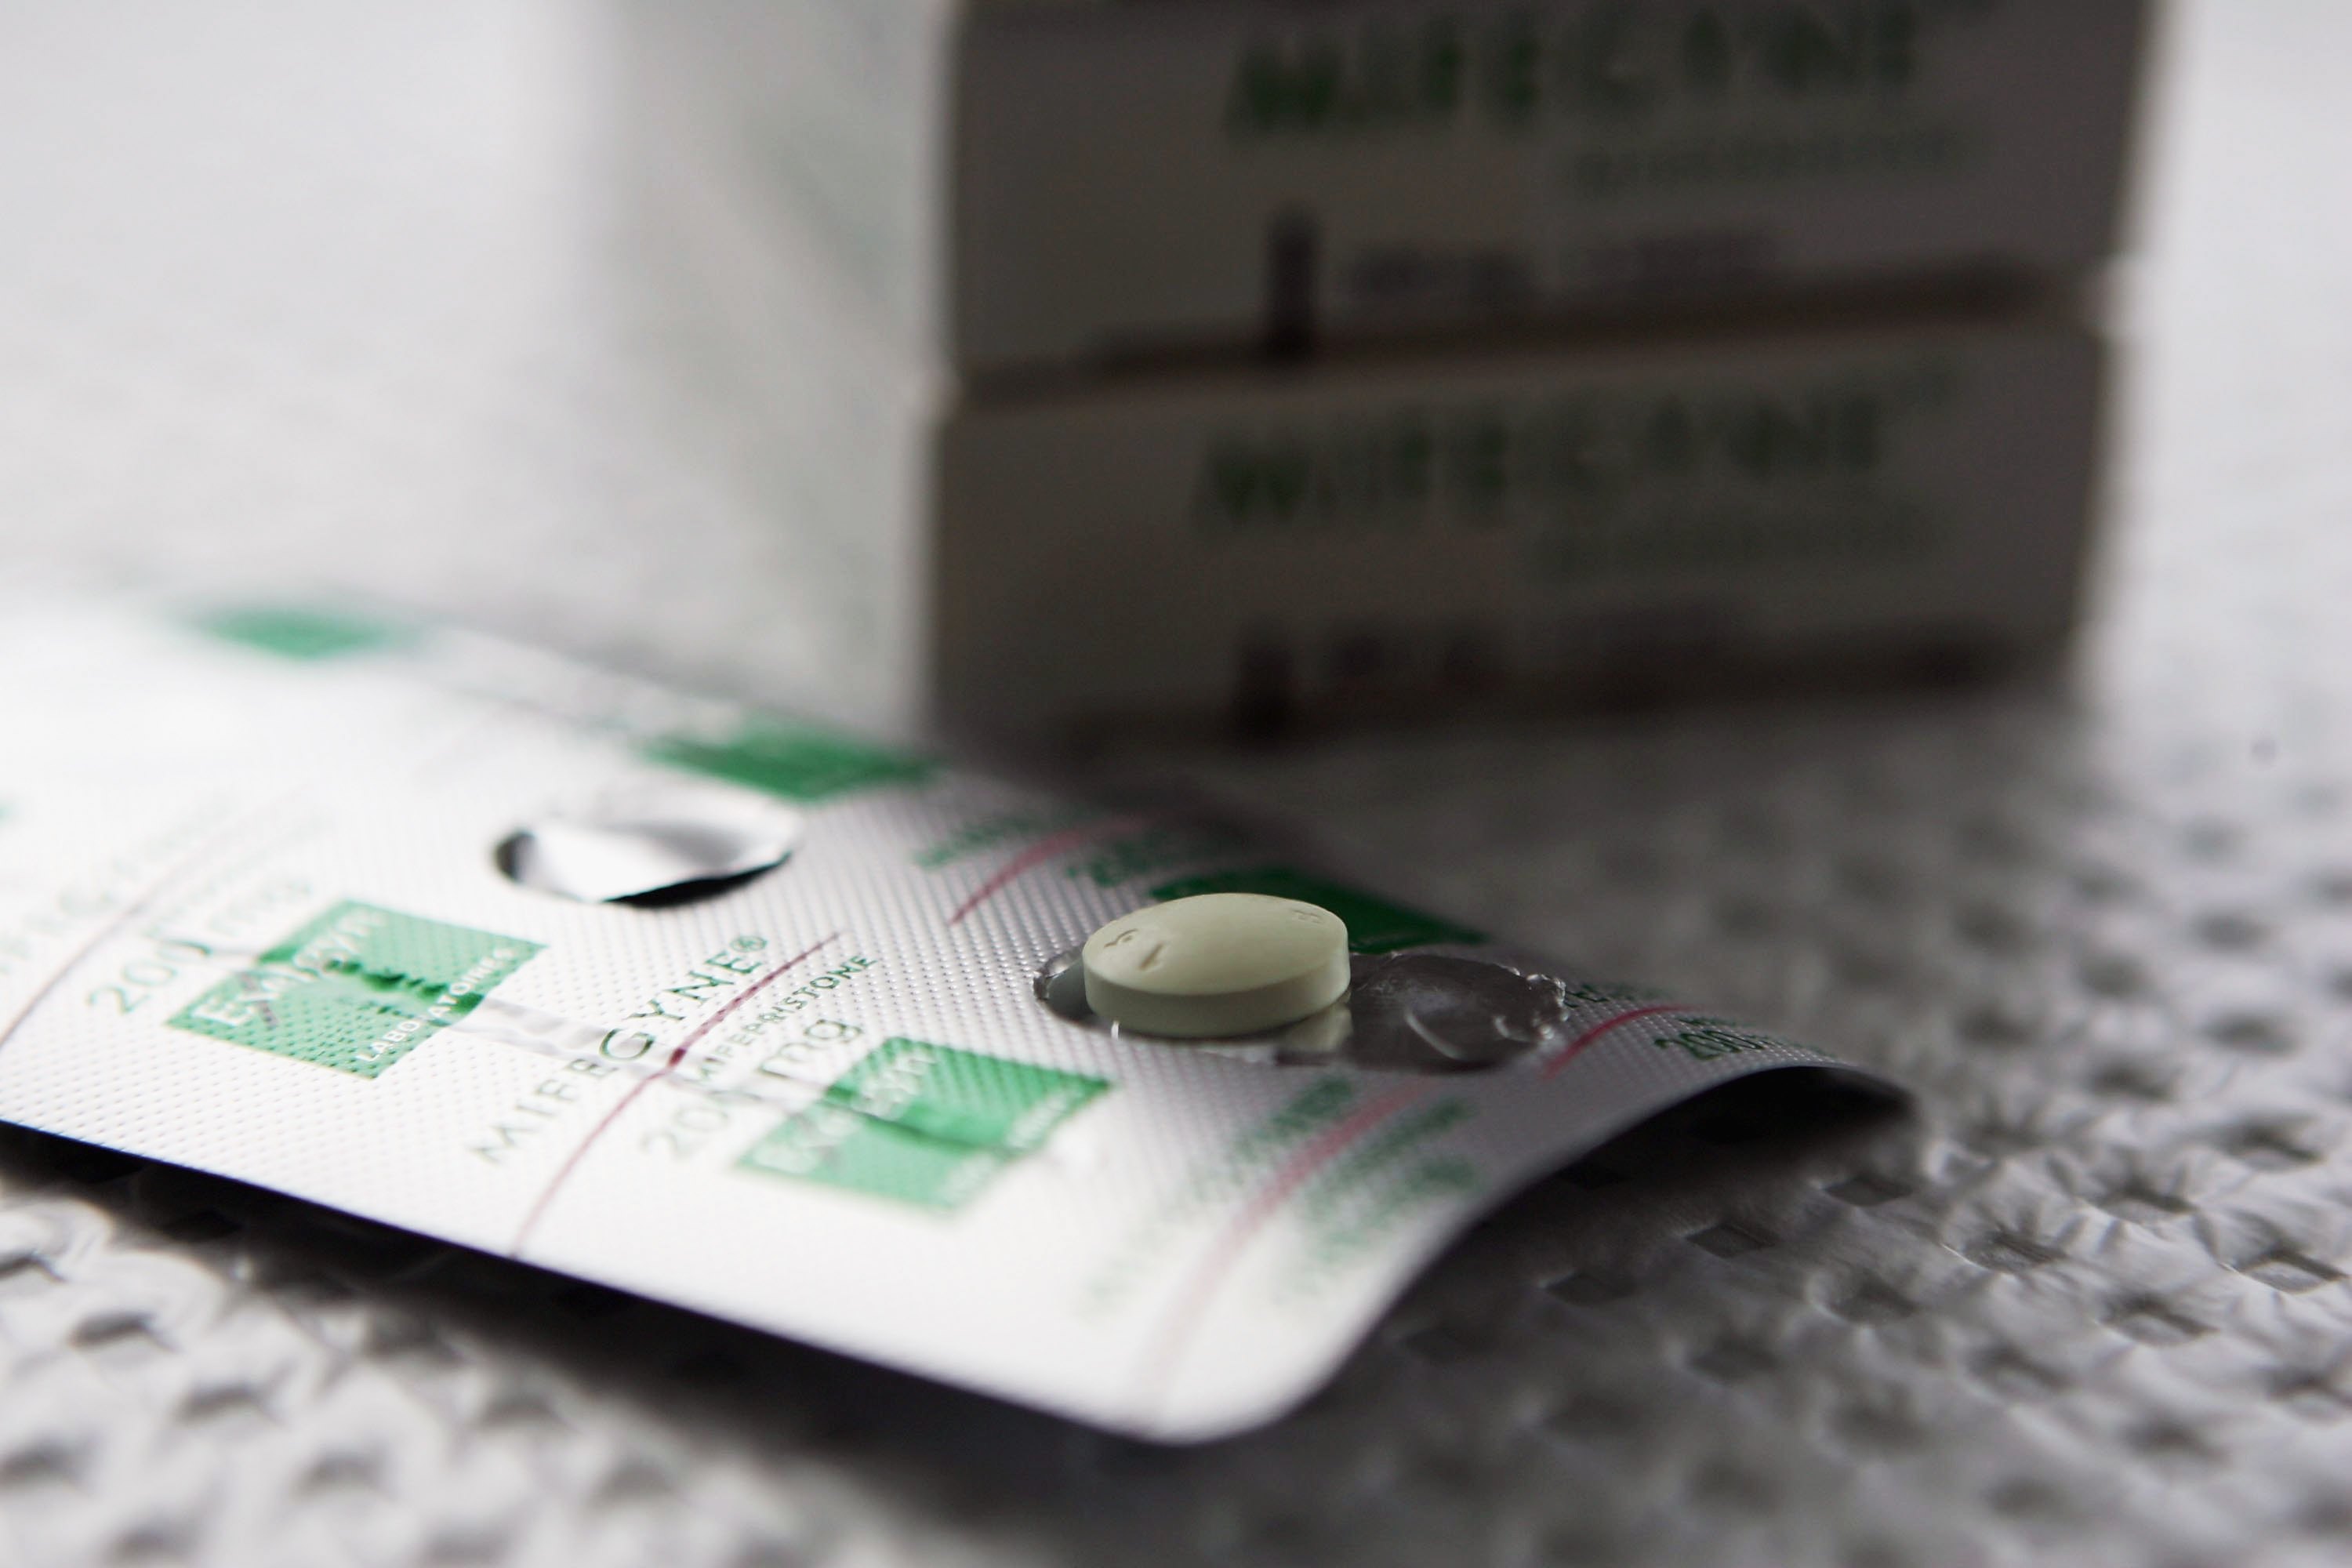 The abortion drug Mifepristone. (Photo by Phil Walter/Getty Images)